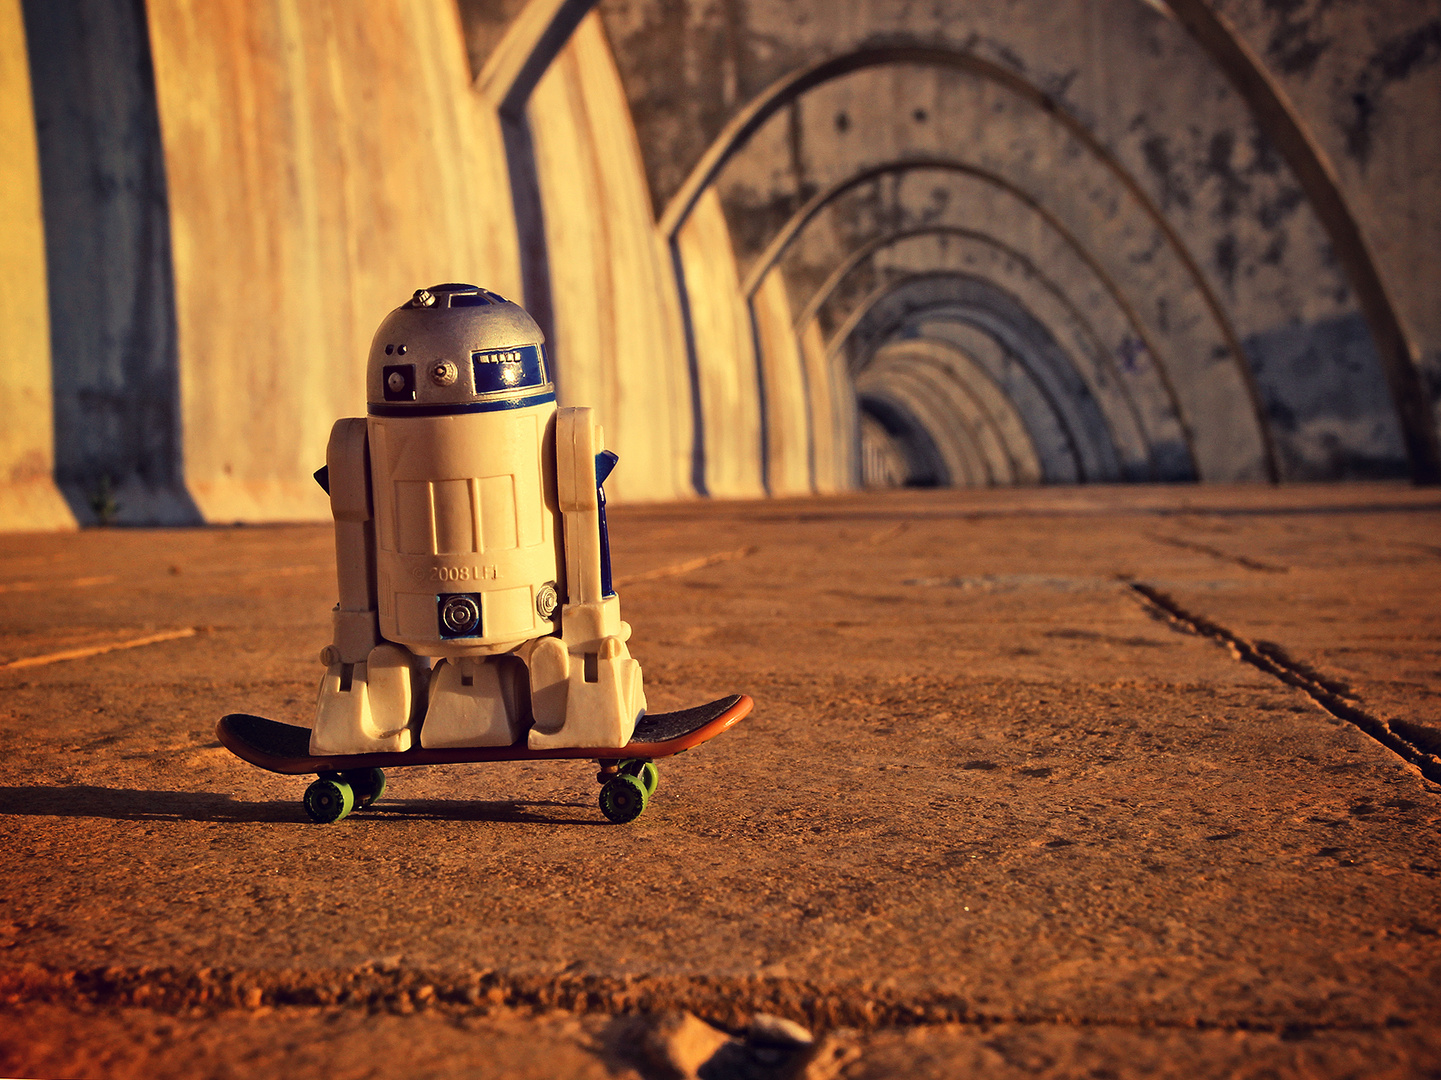 R2D2 wants to see world